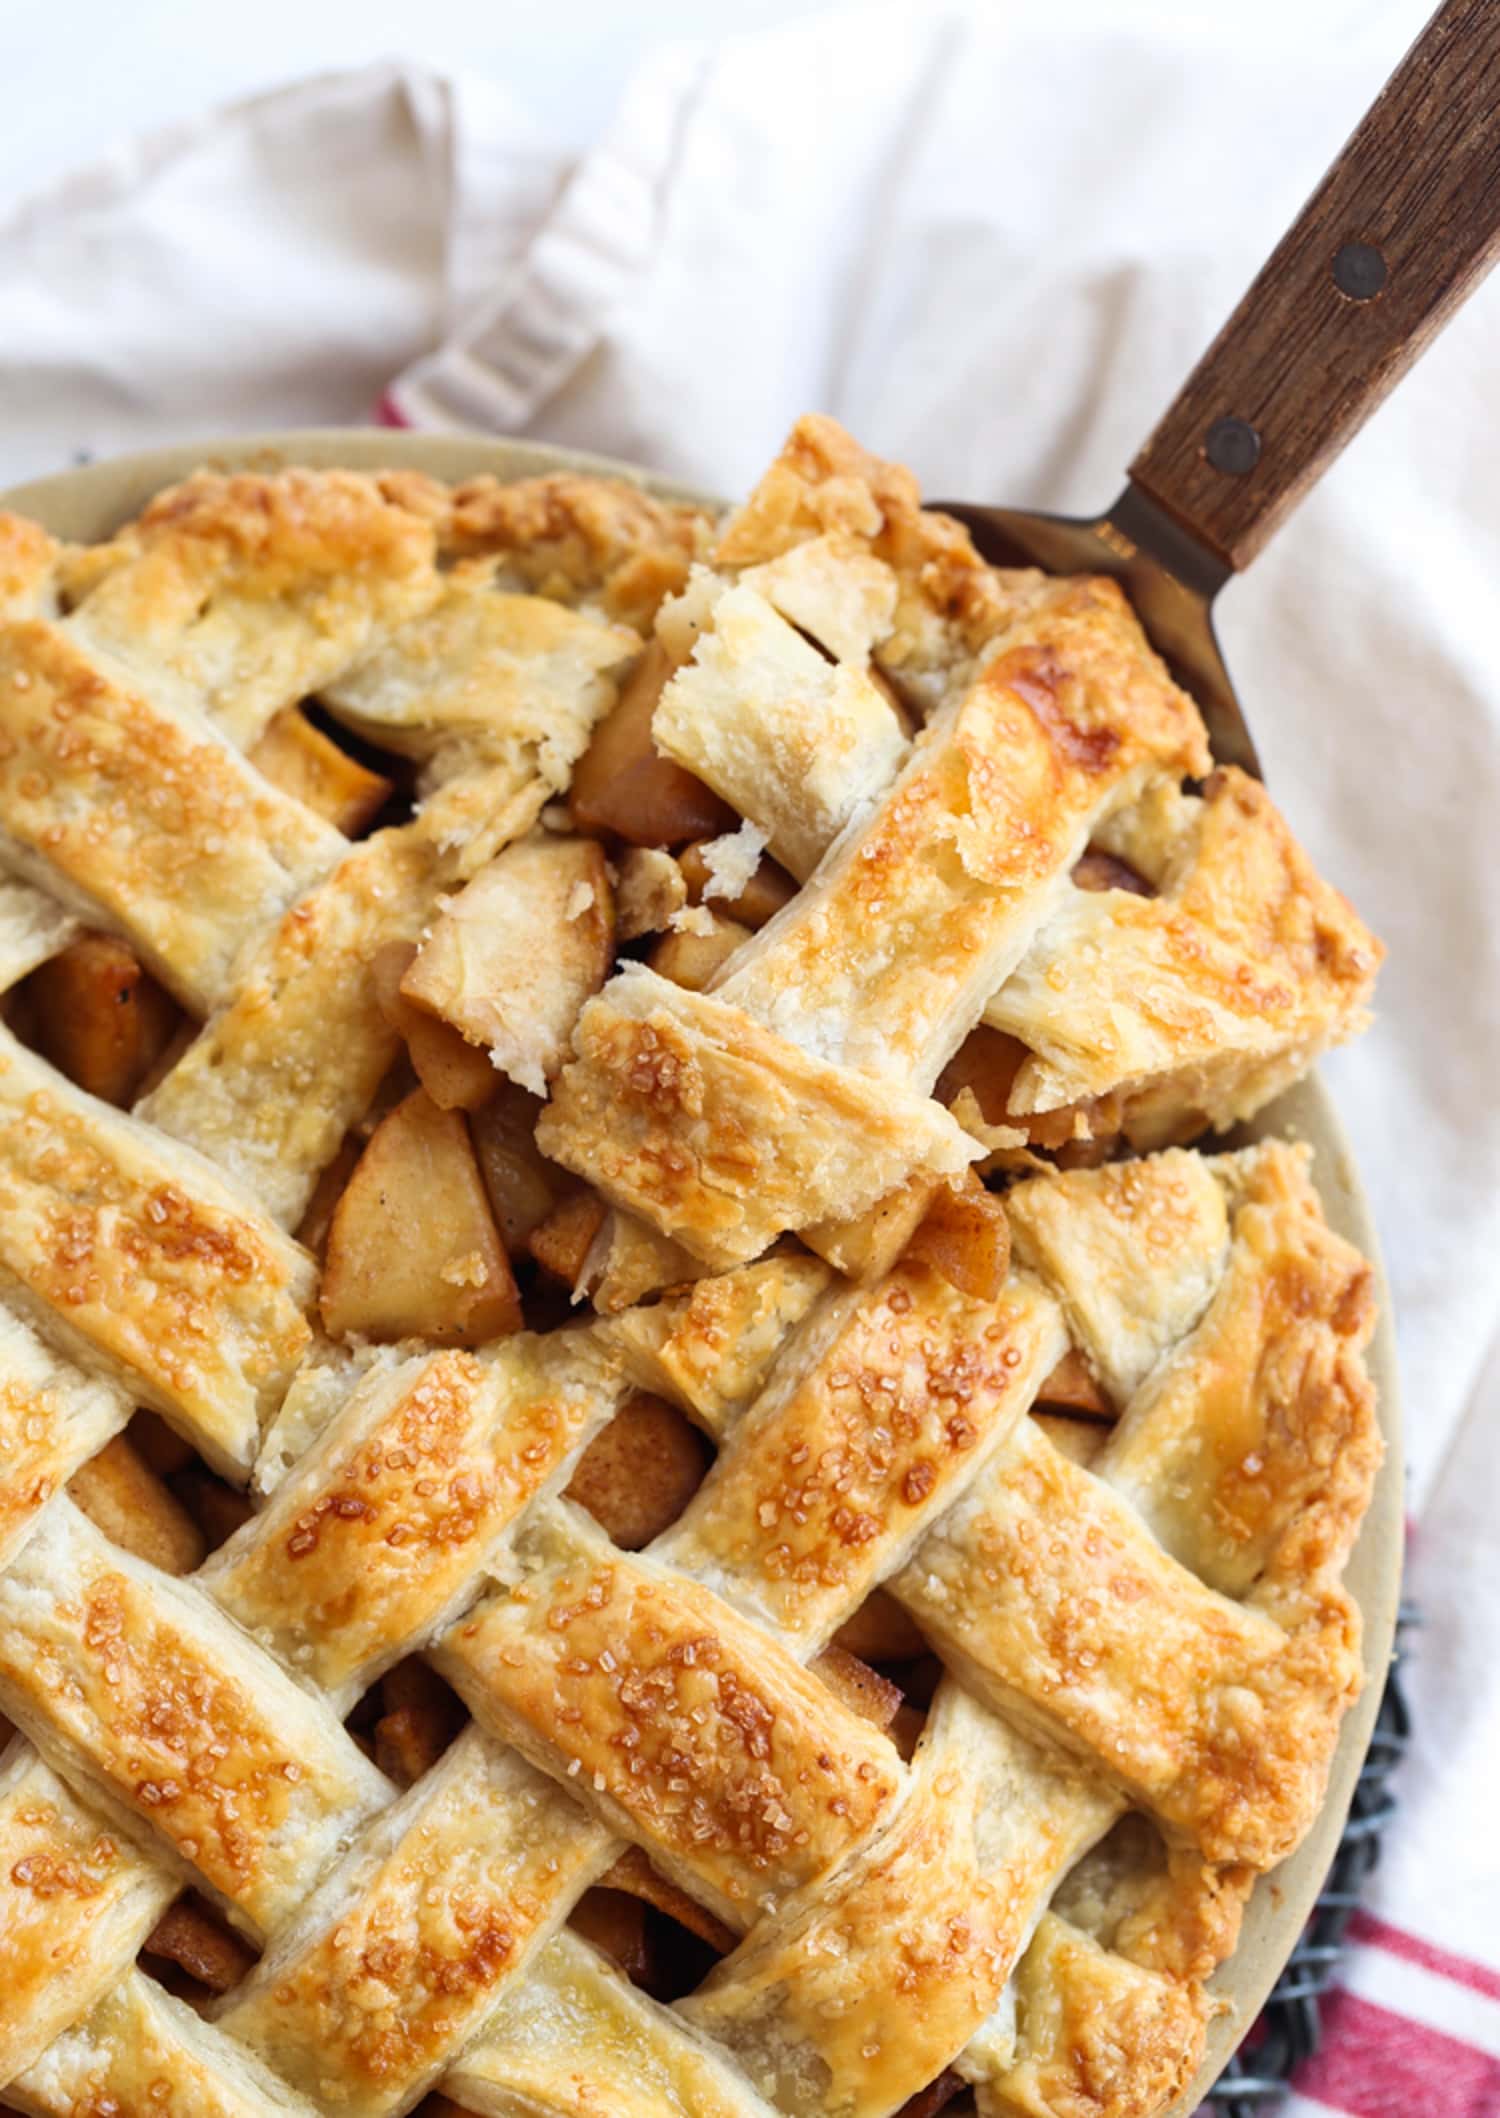 A slice of apple pie with a lattice crust lifted from a full pie in a pie plate.